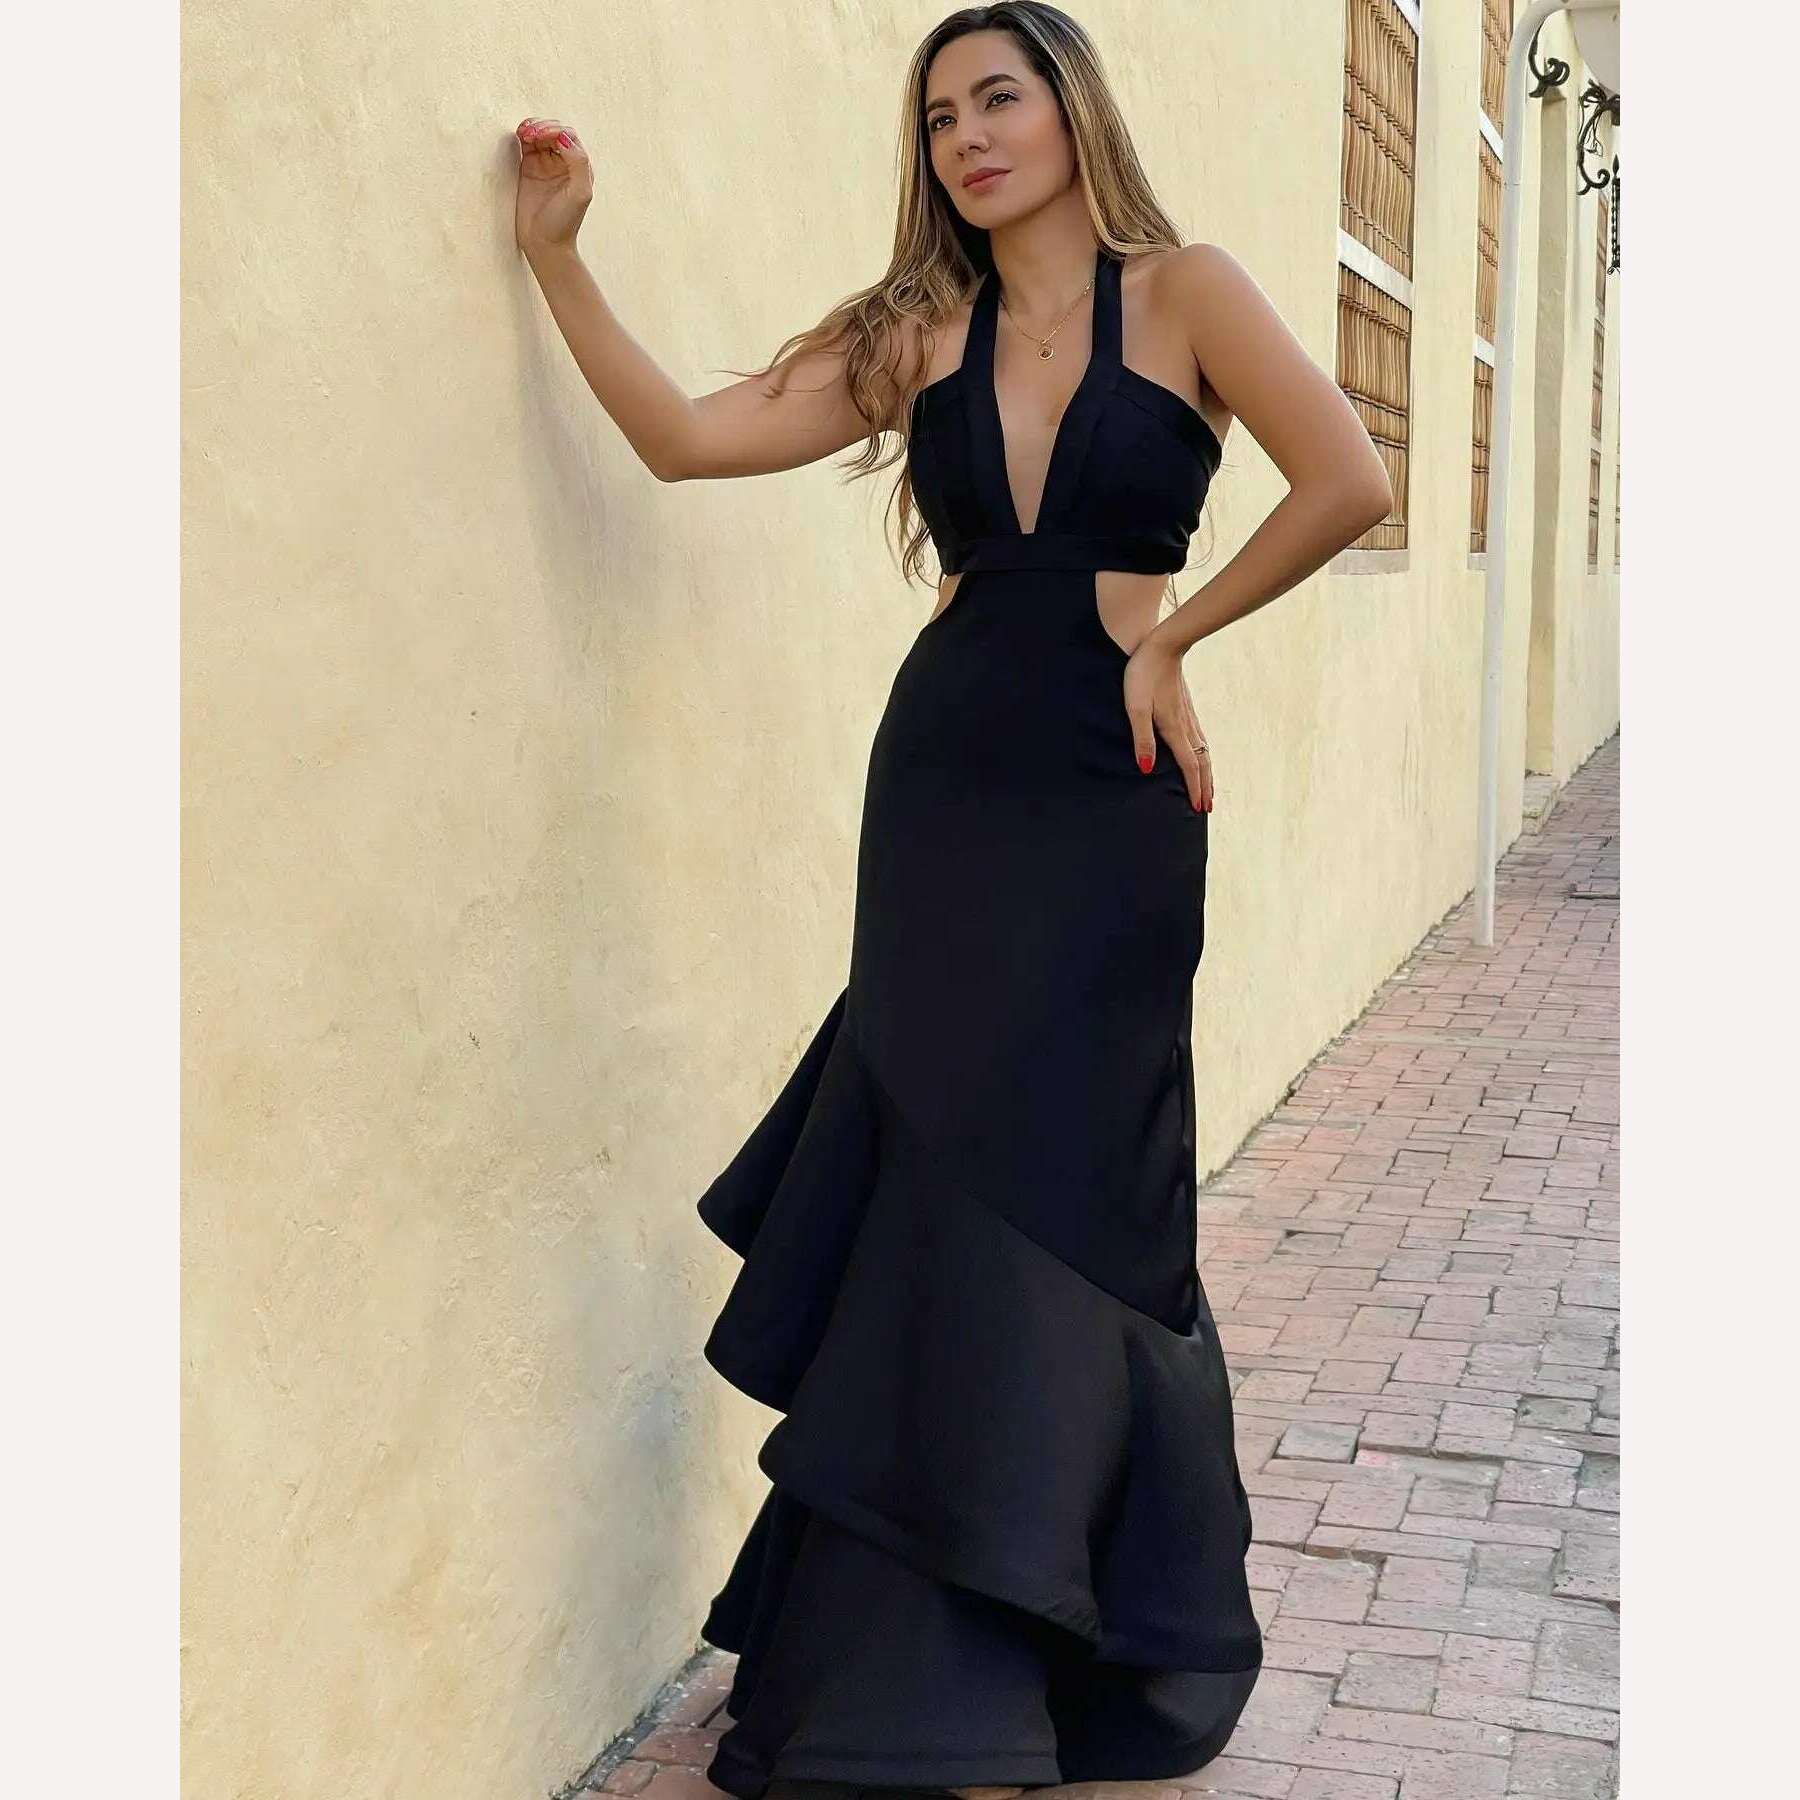 KIMLUD, 2023 Summer New Fashion Women Dresses Elegant Party Female Evening Dress Sexy Women's Clothing Chic Robes, PI23696D1 / S, KIMLUD Women's Clothes